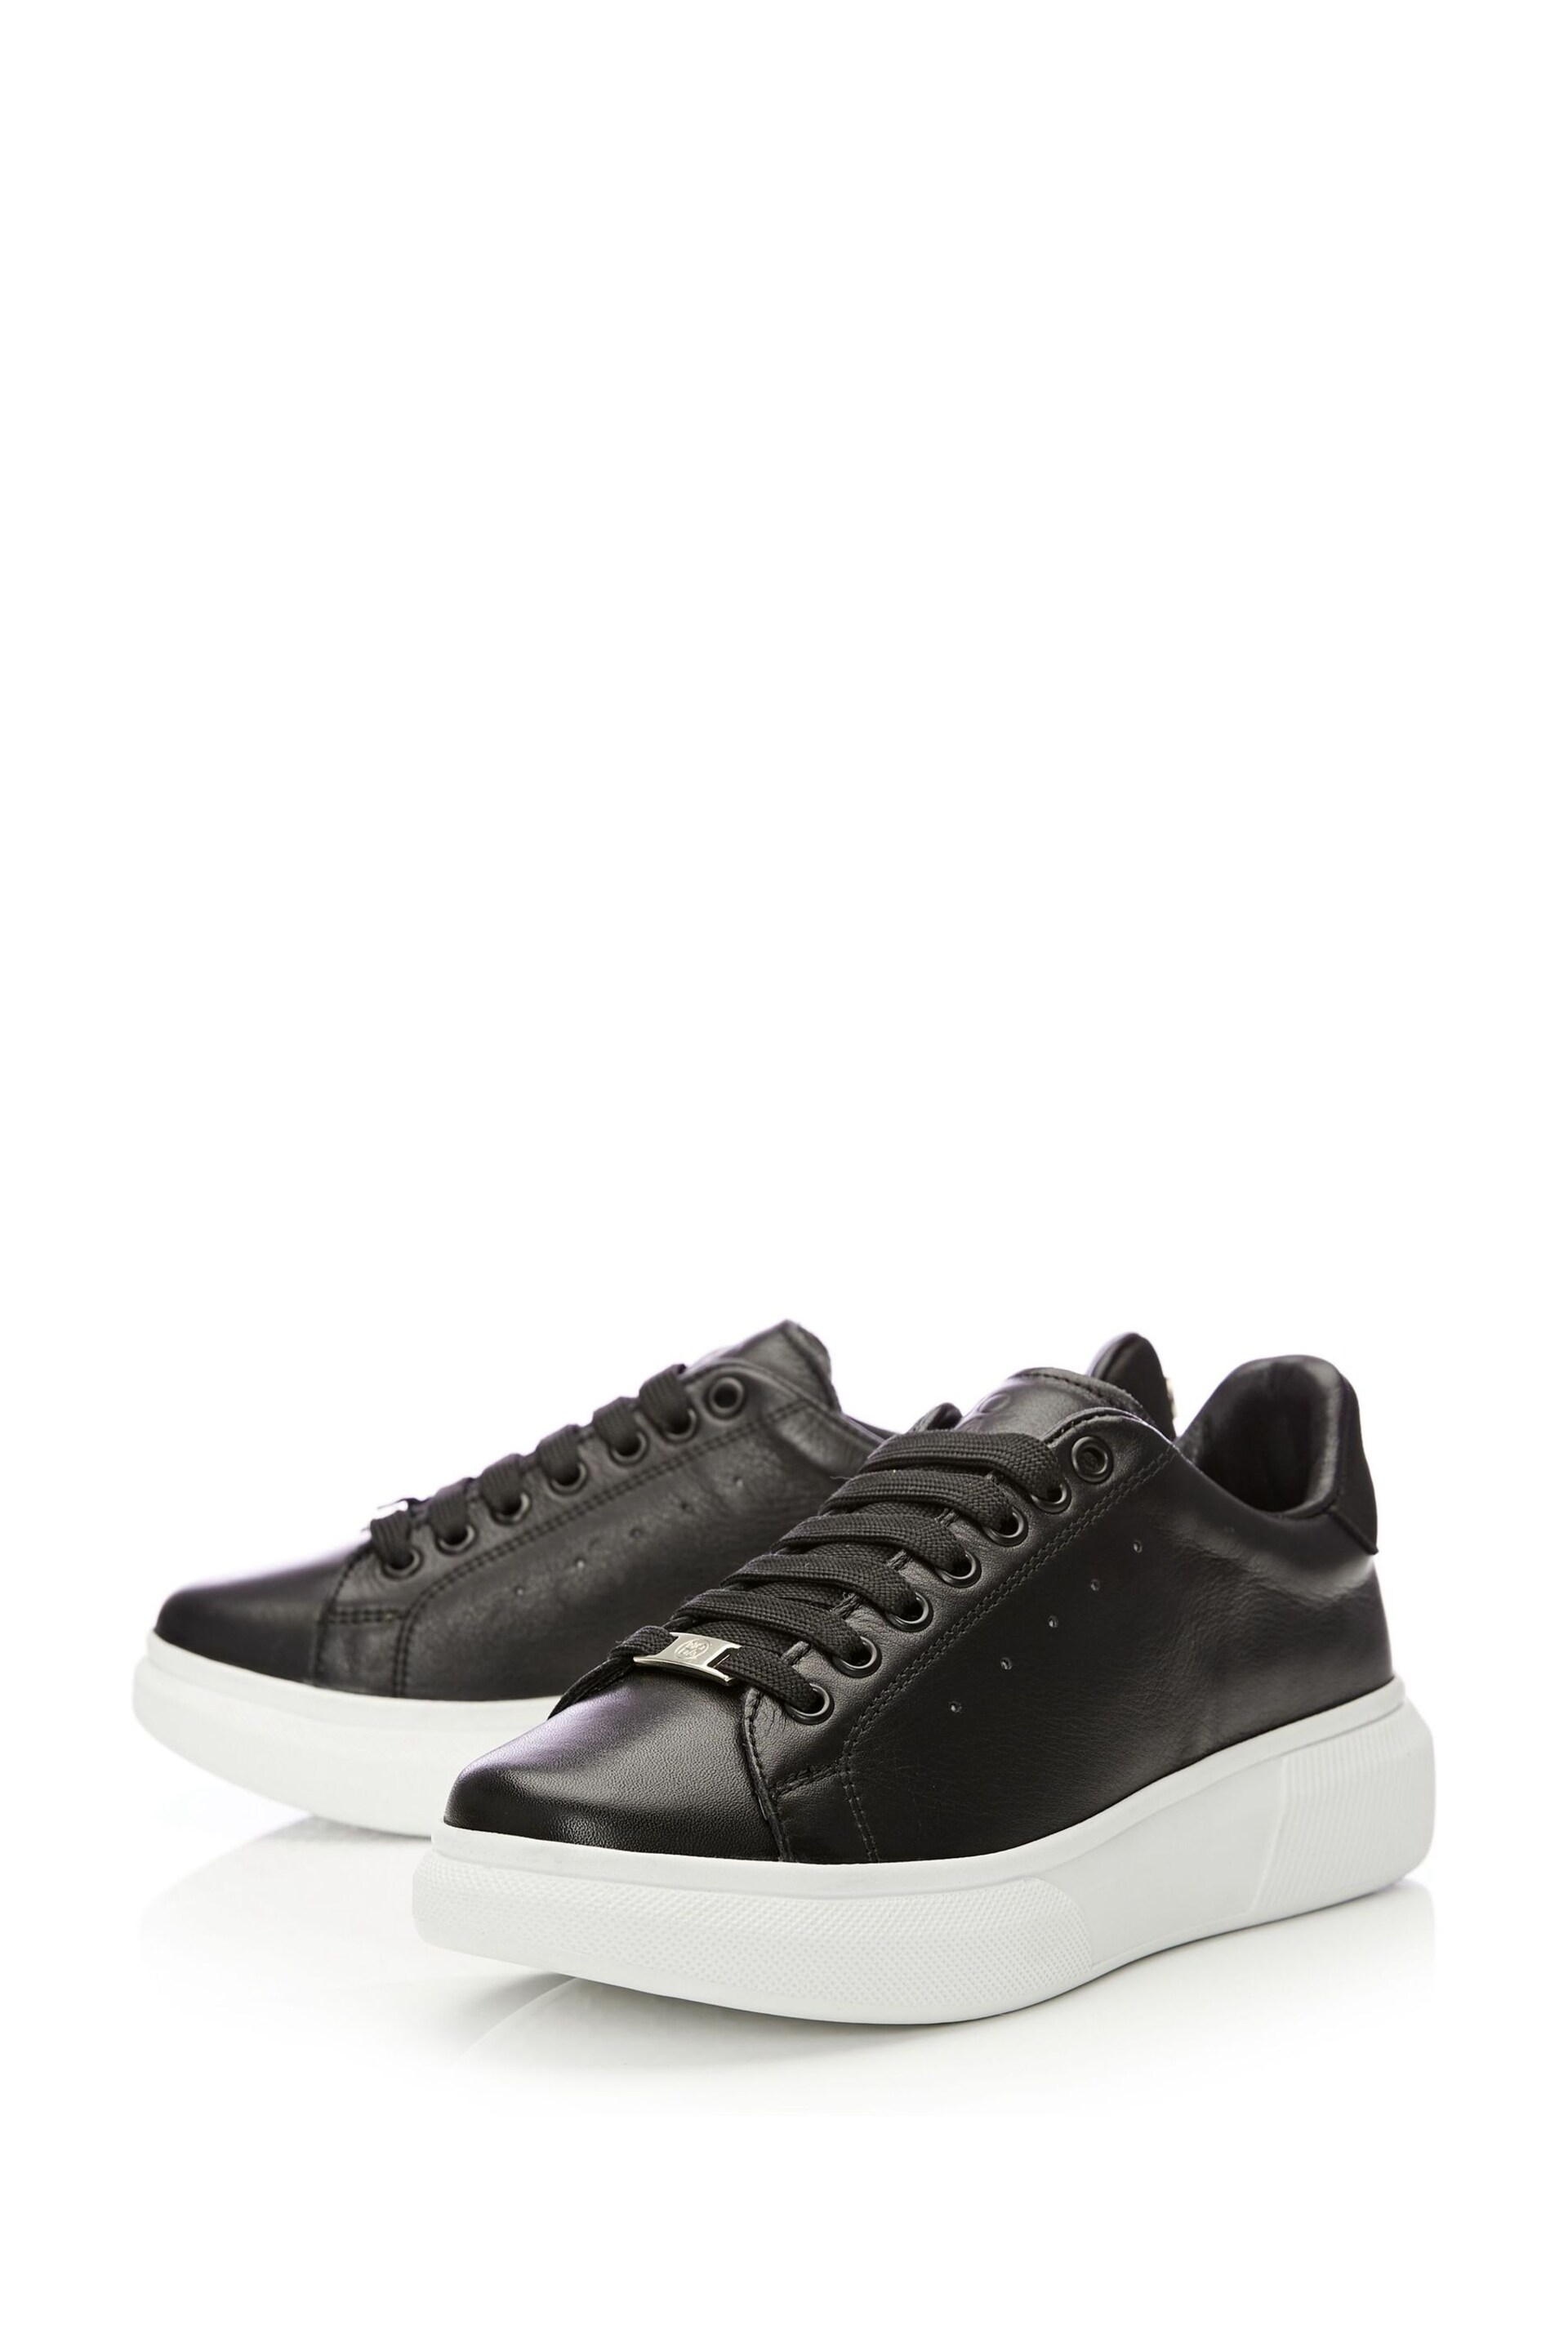 Moda in Pelle Bridgette Lace-Up Black Trainers With Slab Sole - Image 4 of 6